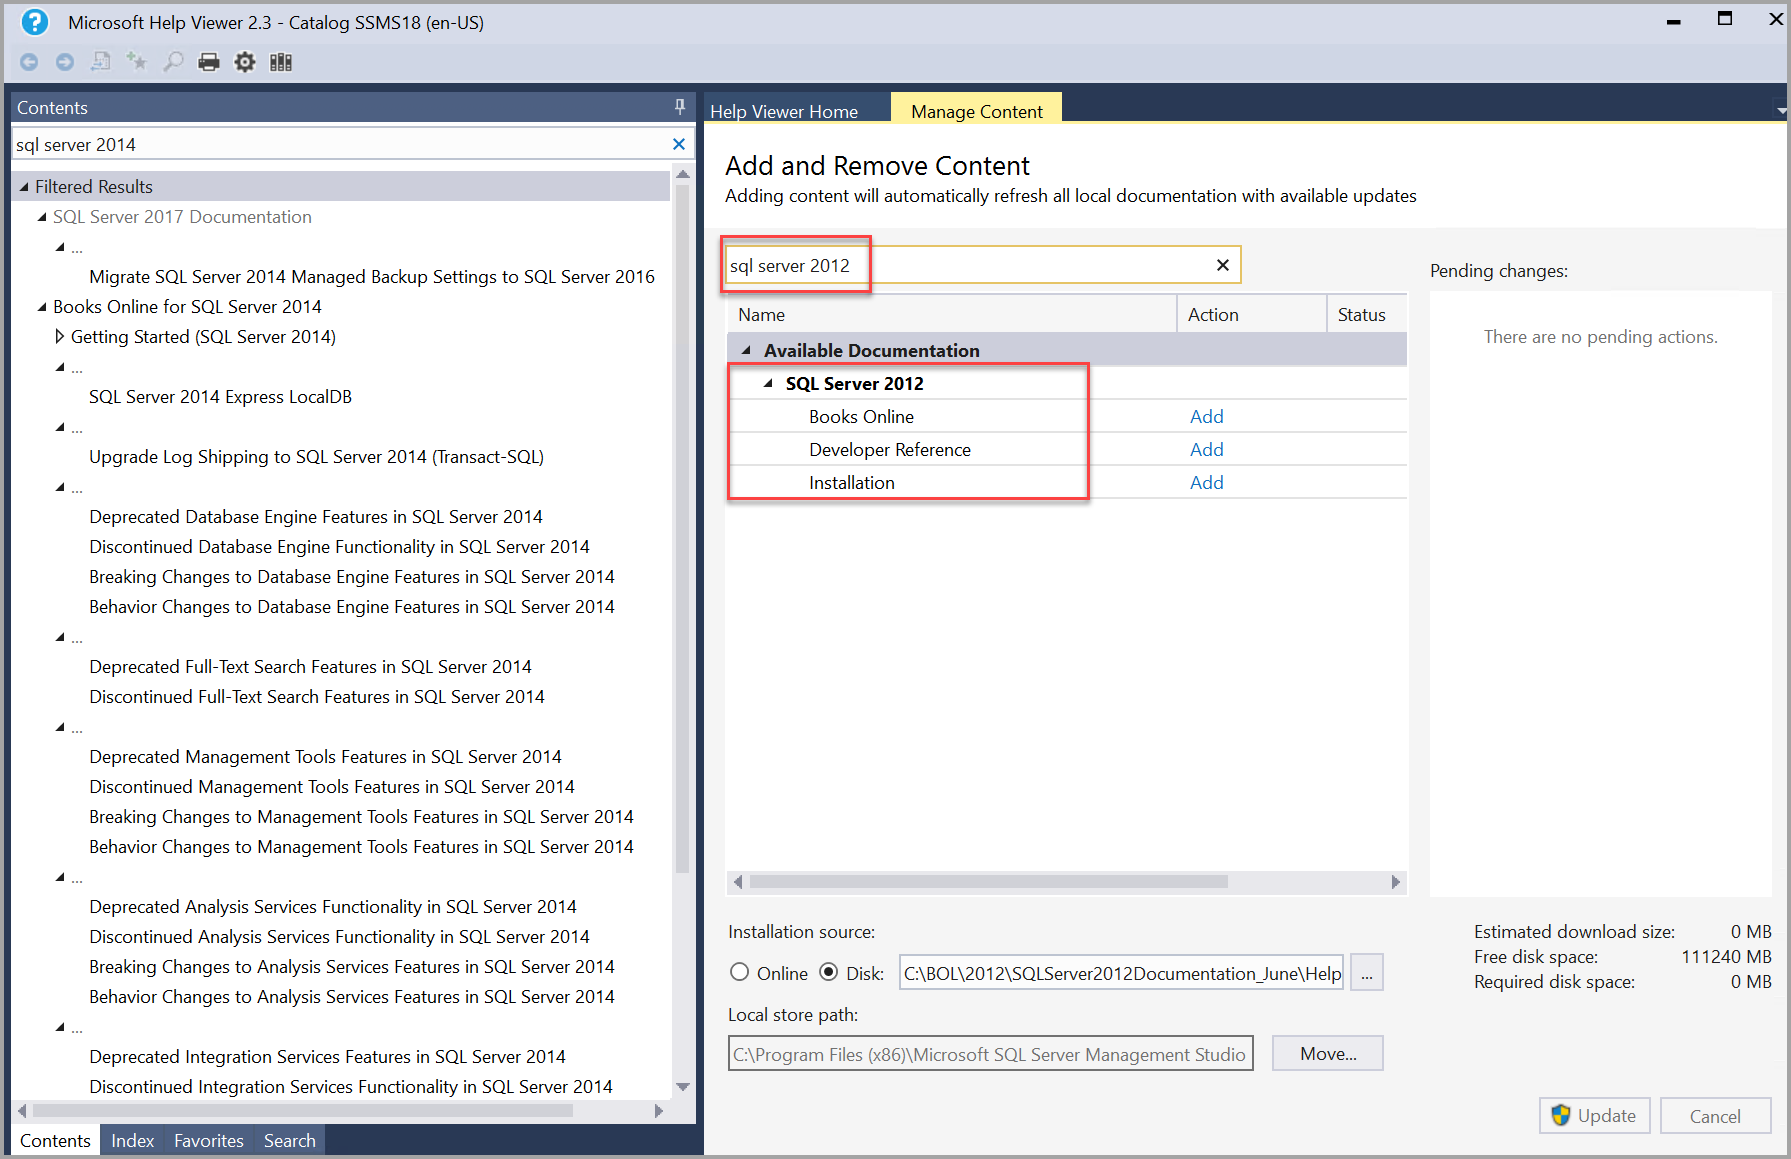 Screenshot of SQL Server 2012 documentation search in Help Viewer.